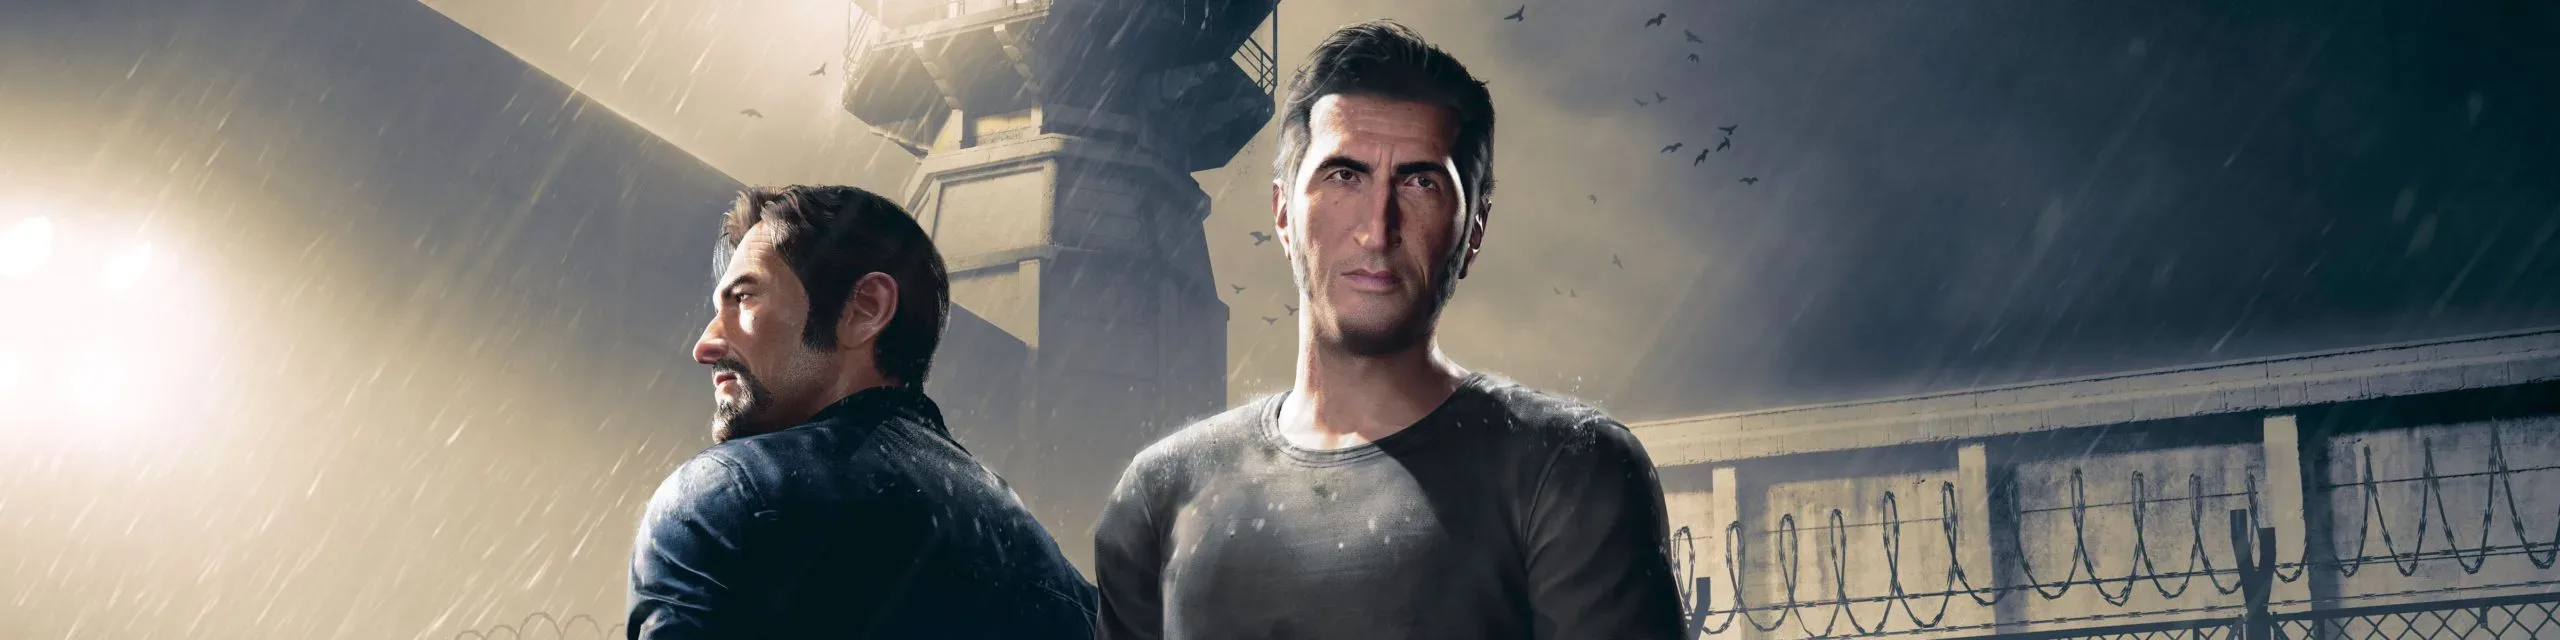 A Way Out Director's New Game To Be Announced Soon